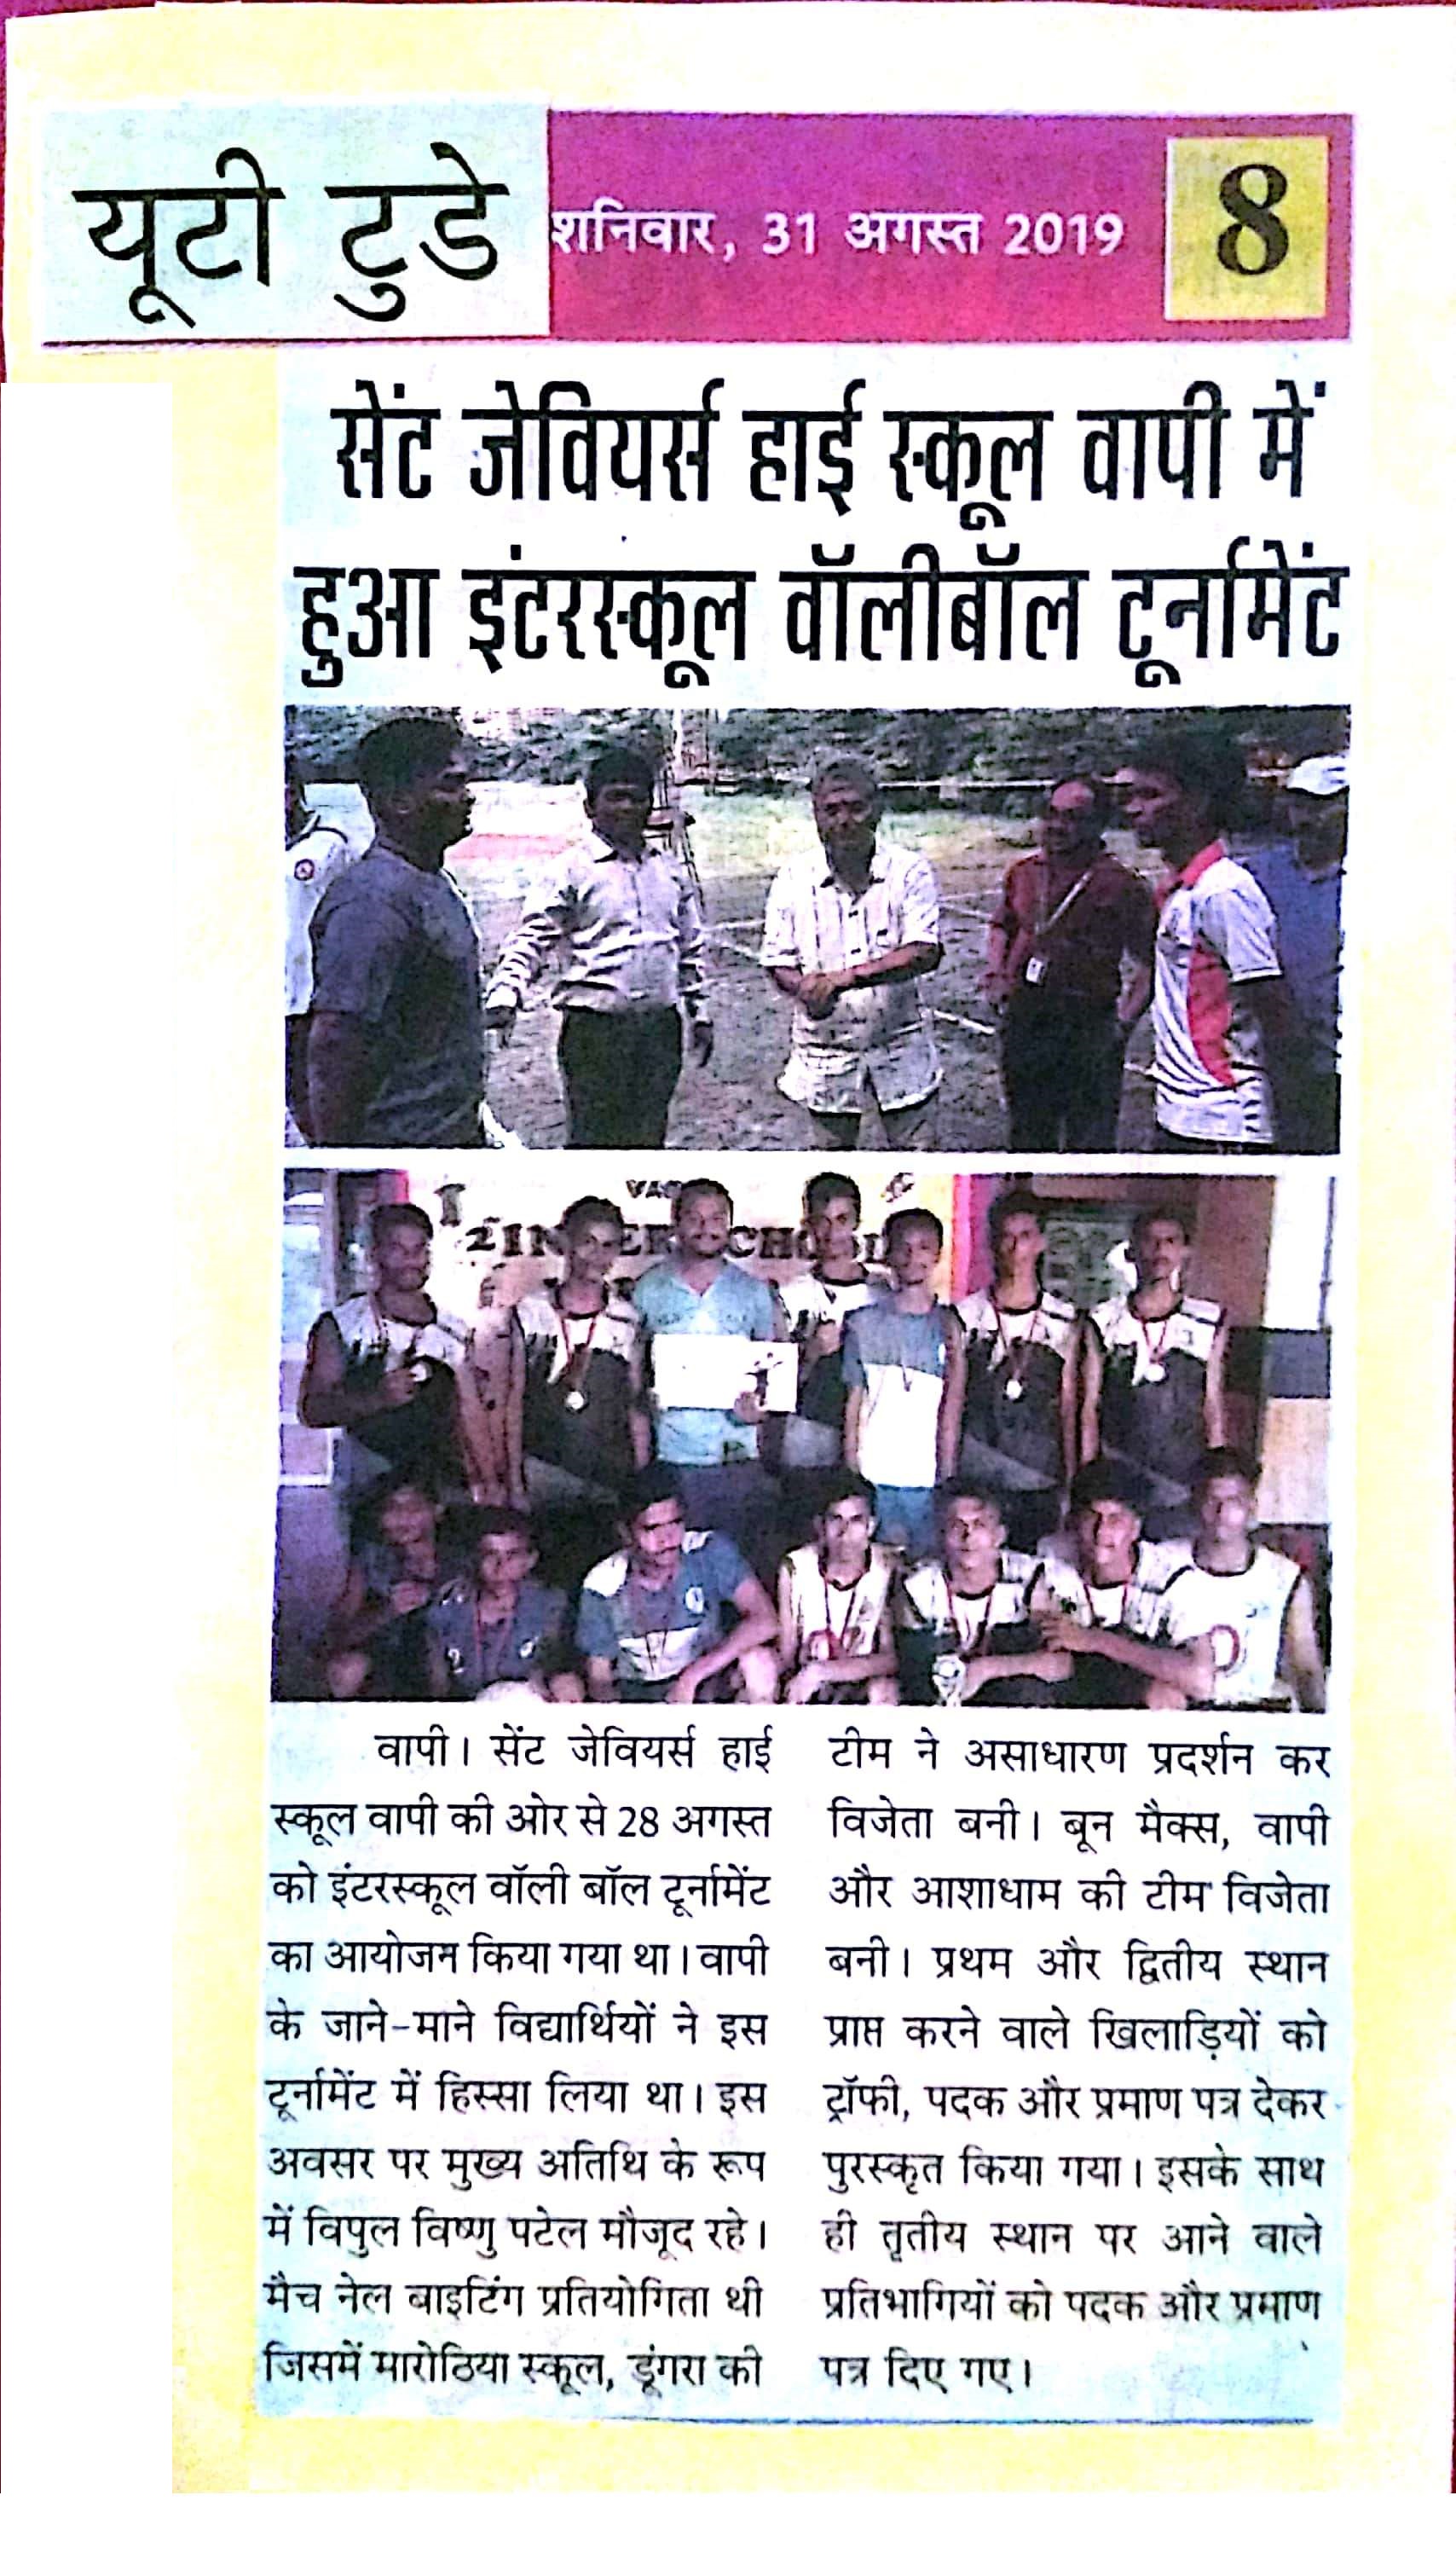 Interschool Volleyball Tournament Was Featured In U.T. Today